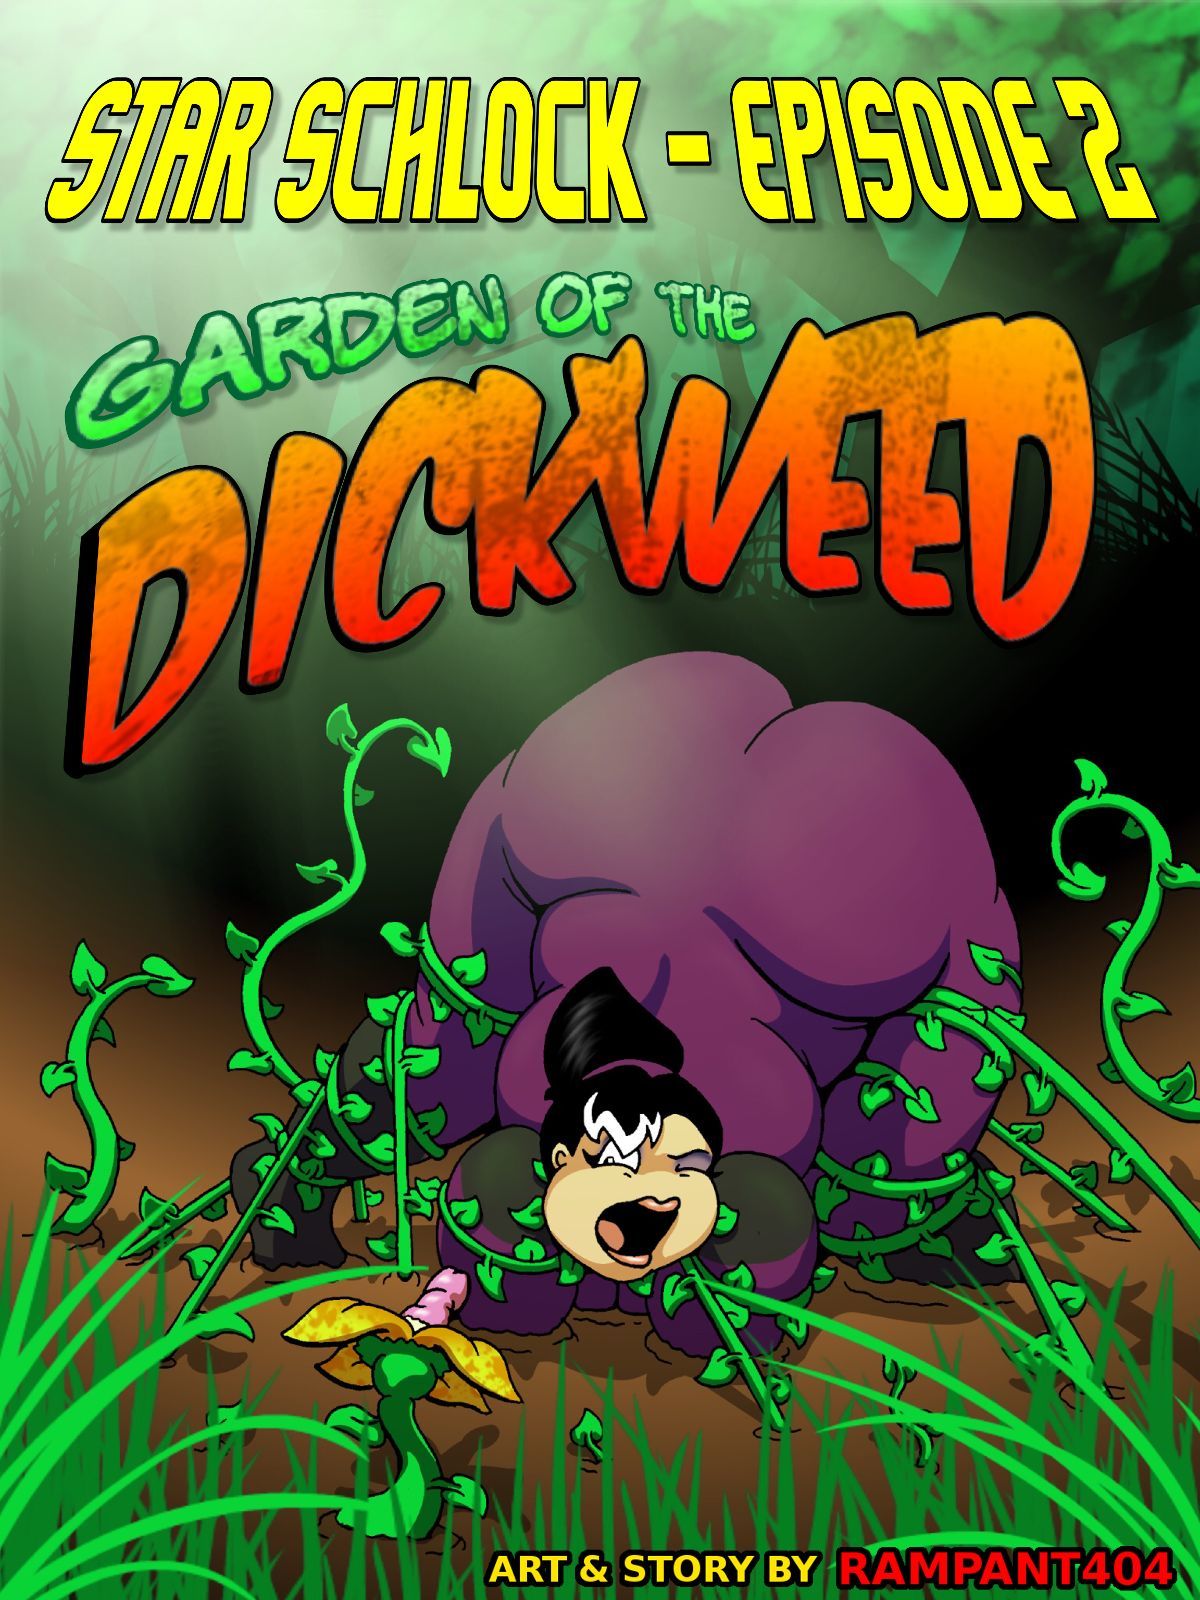 Tales of Schlock 41 - Garden of the Dickweed Rampant404 page 2